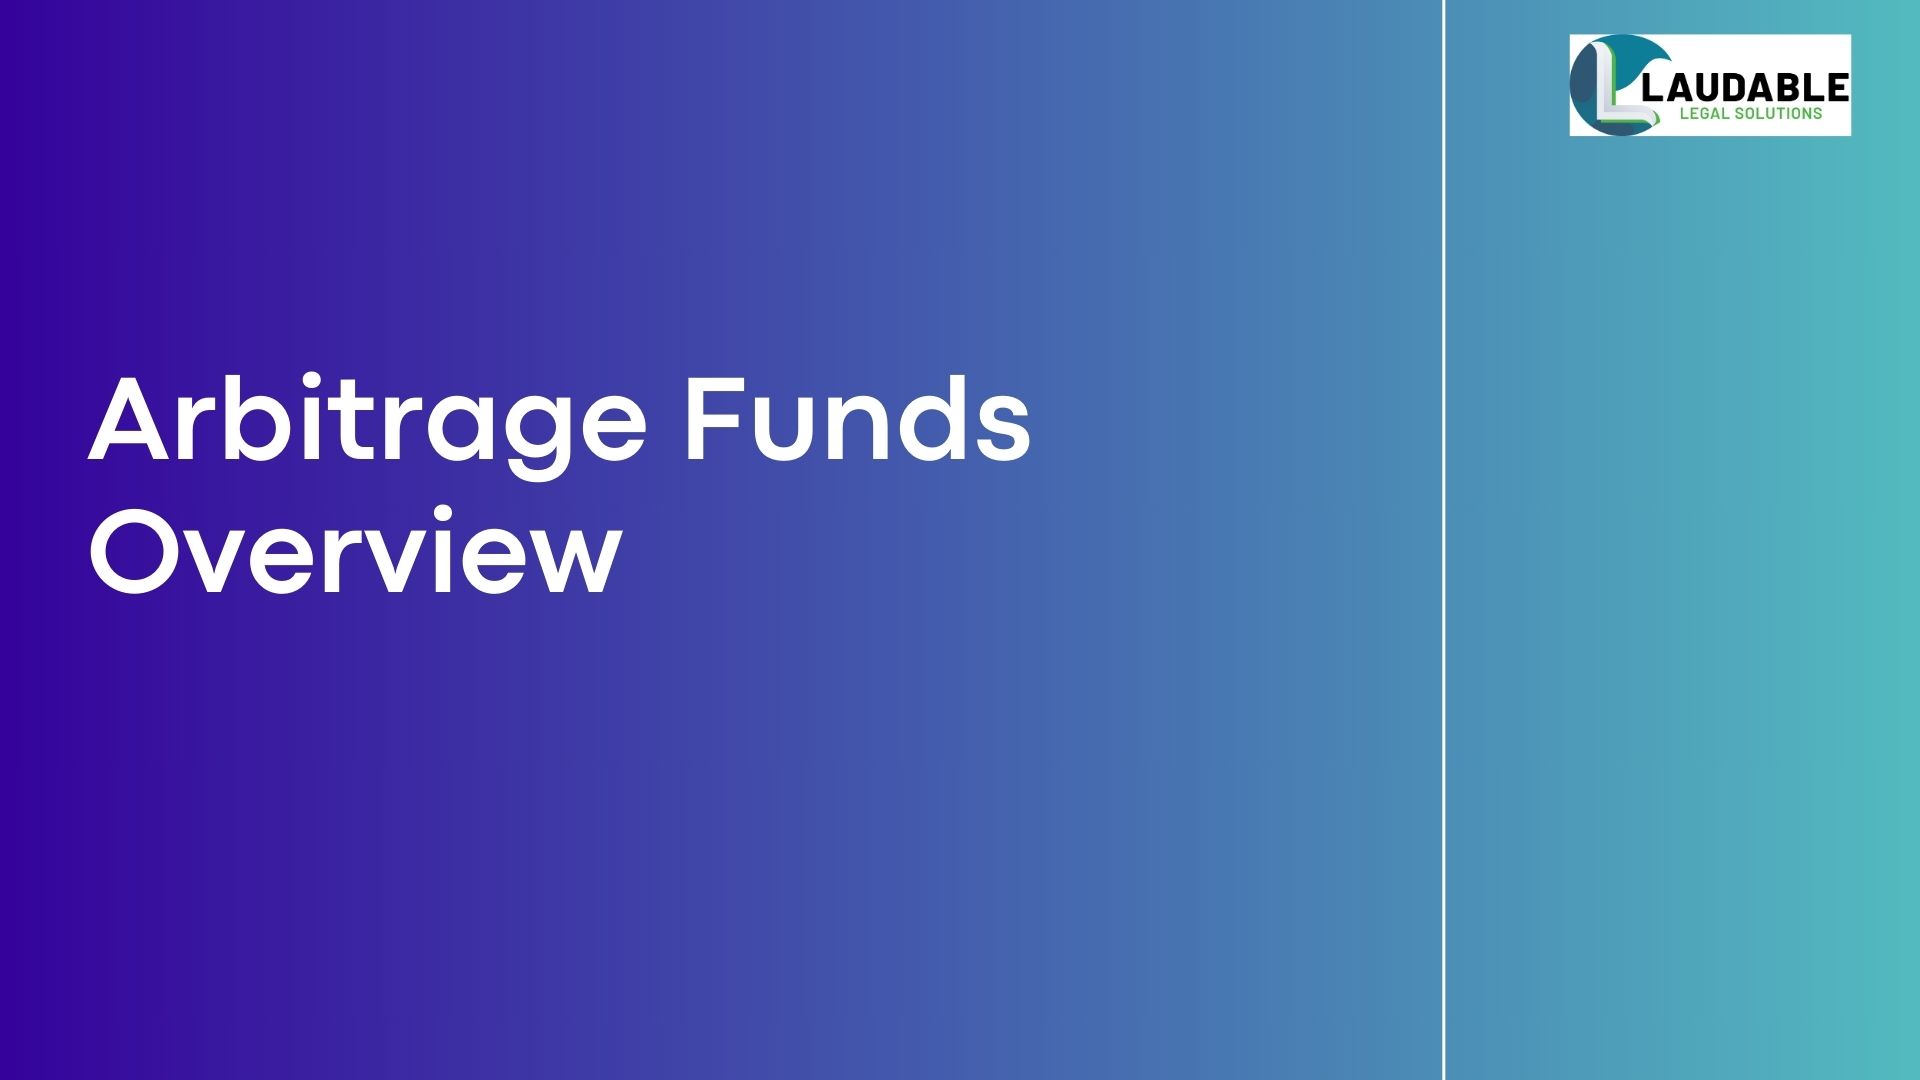 Arbitrage Funds Overview